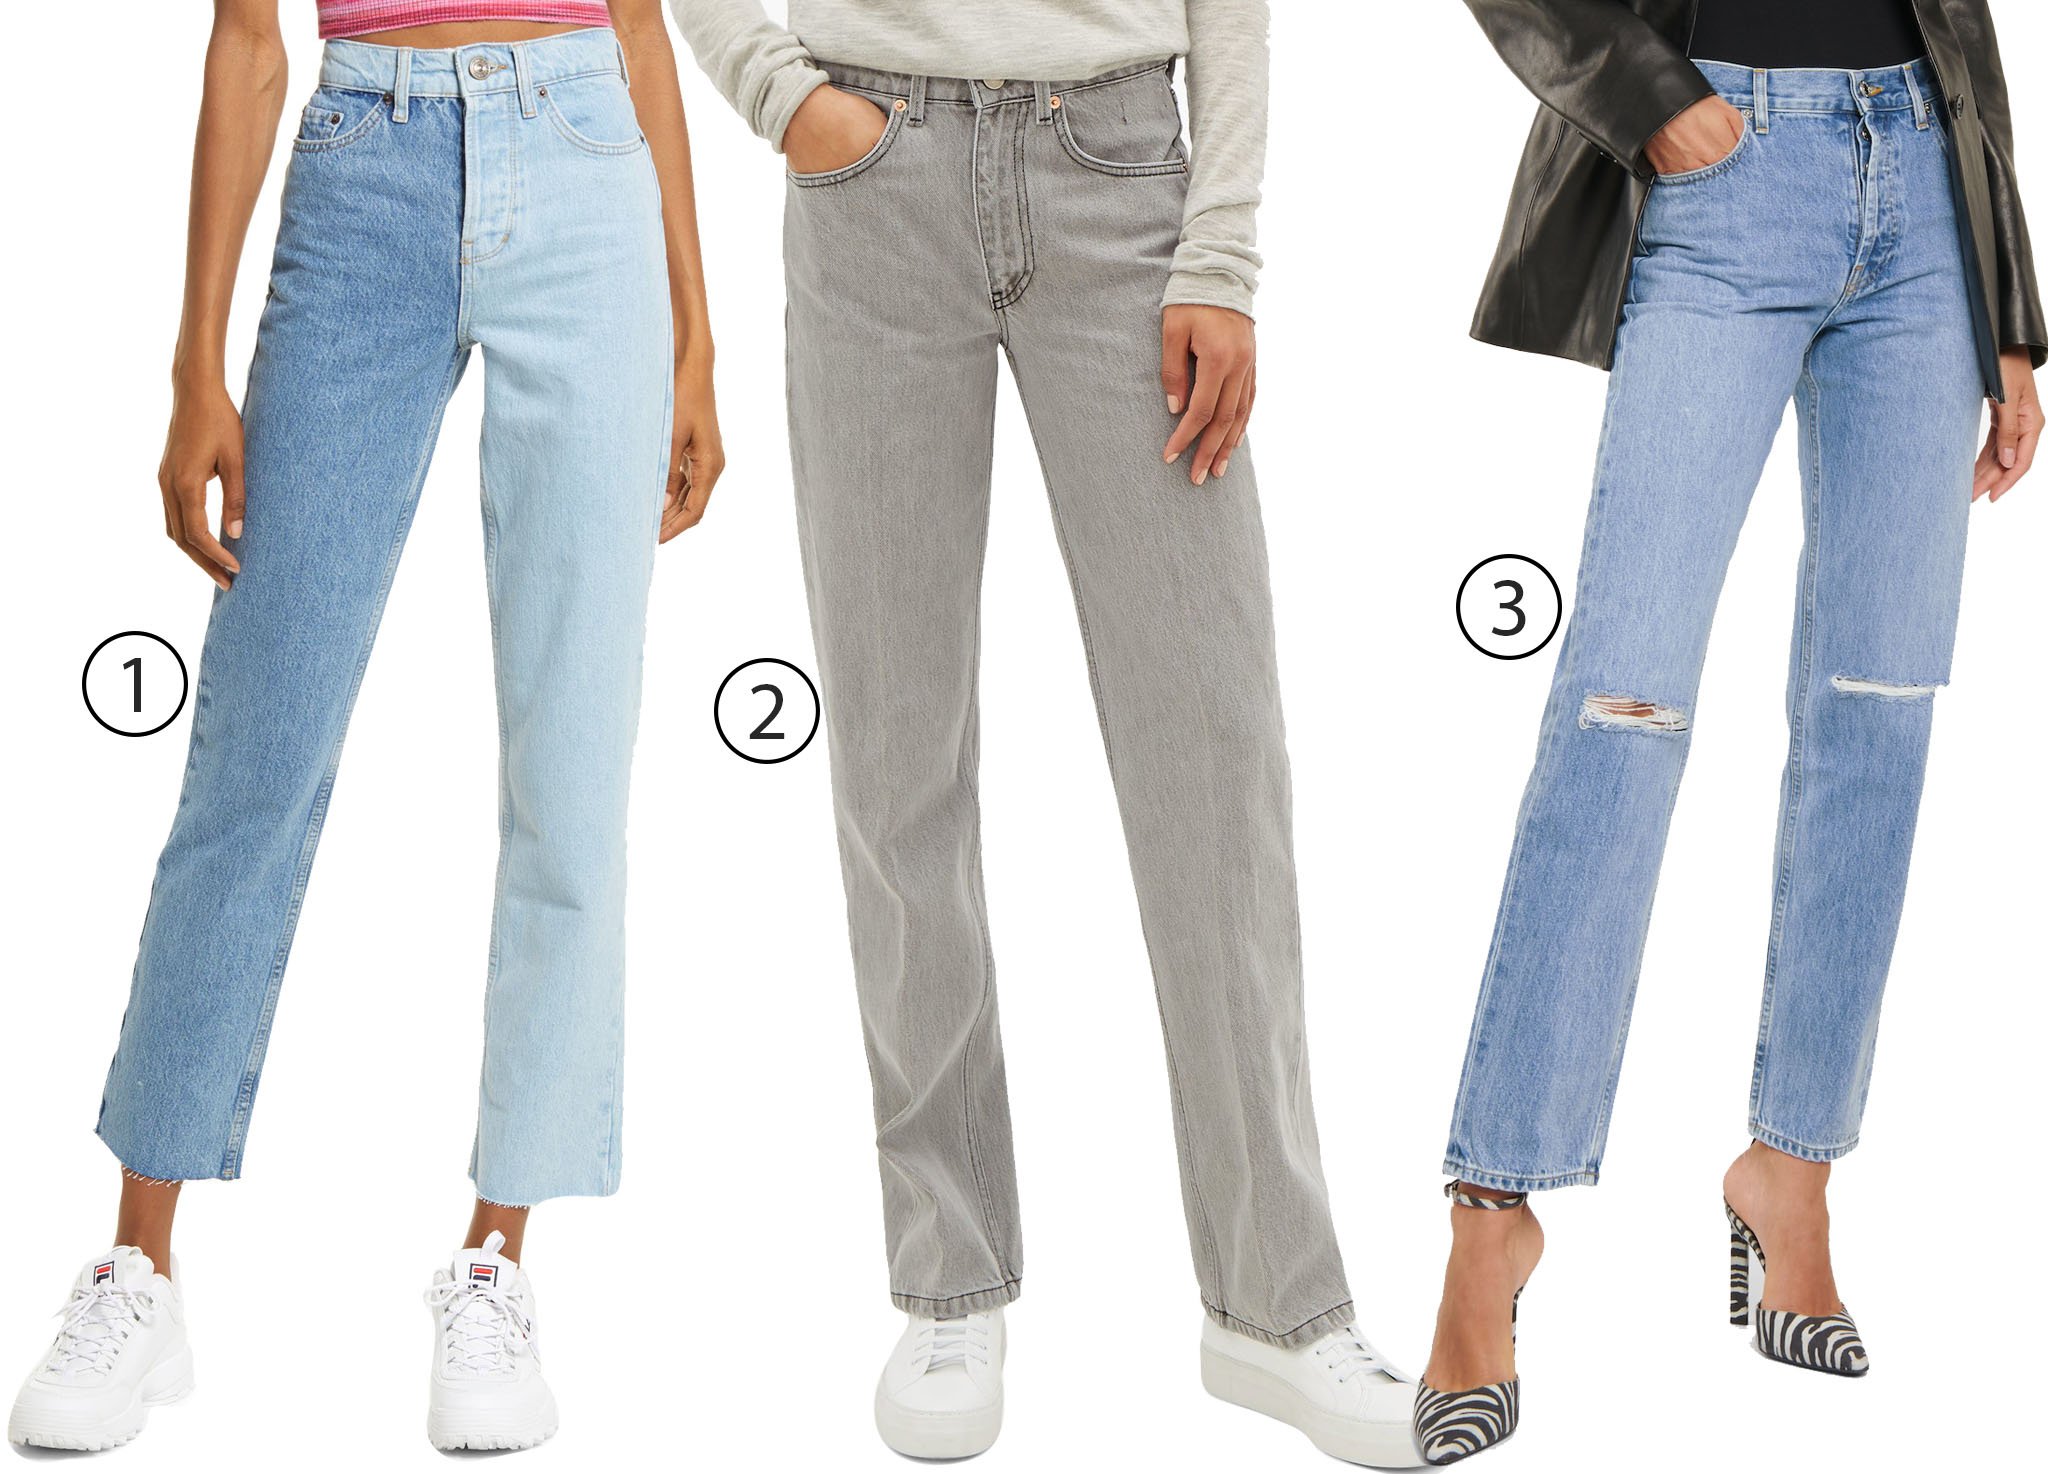 1. BDG Urban Outfitters Two-Tone Pax Straight-Leg Jeans 2. Raey Push Straight-Leg Jeans 3. Helmut Lang Distressed High-Rise Straight Jeans